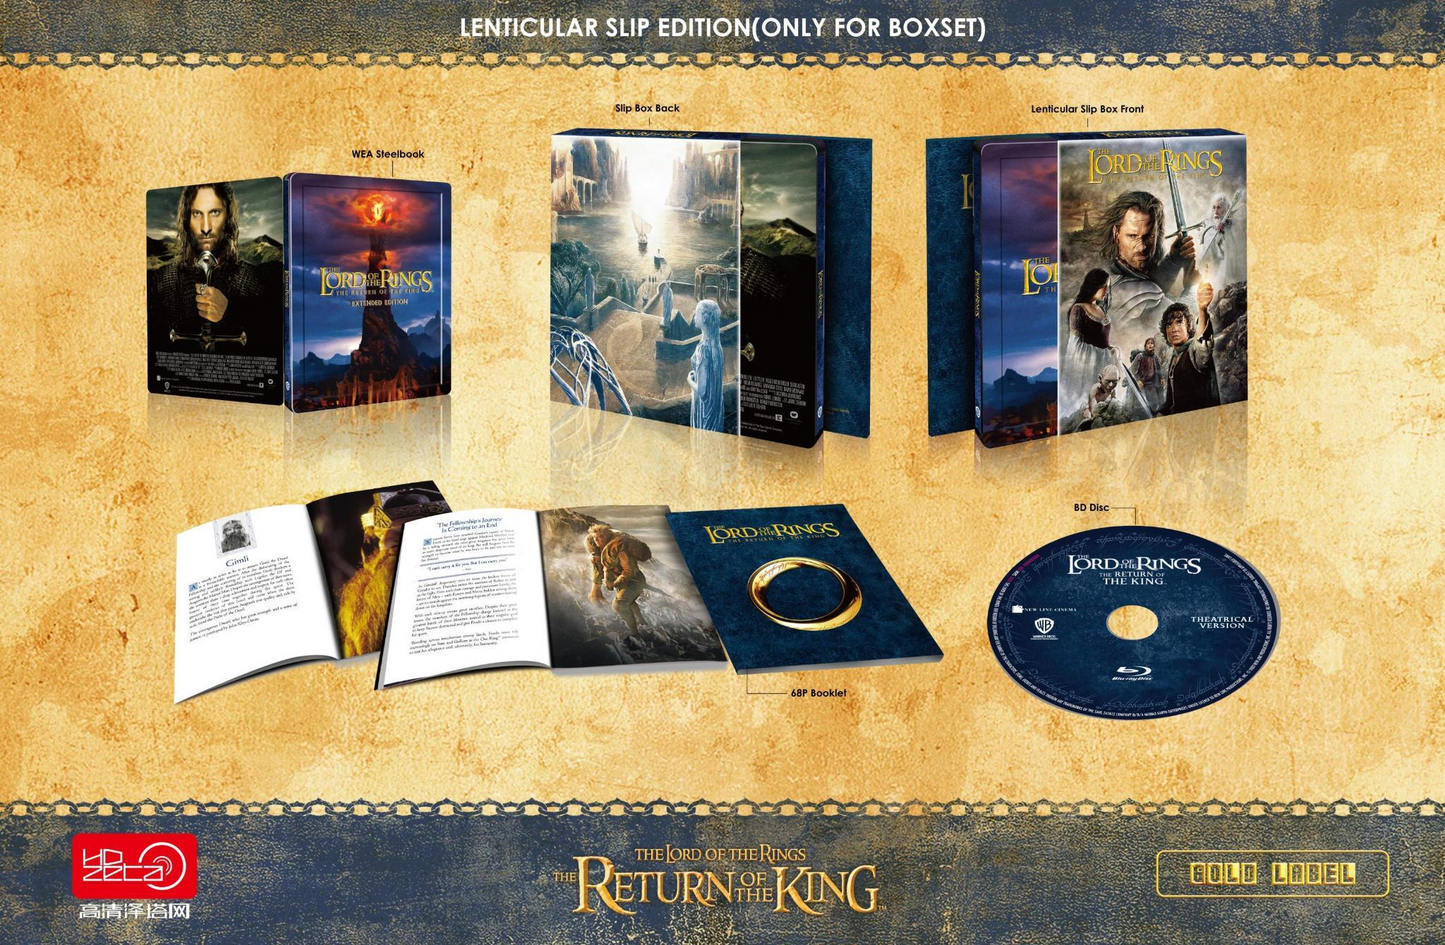 The Lord Of The Rings Trilogy 4K Blu-ray Steelbook HDZeta Exclusive Gold Label Triple Box Set